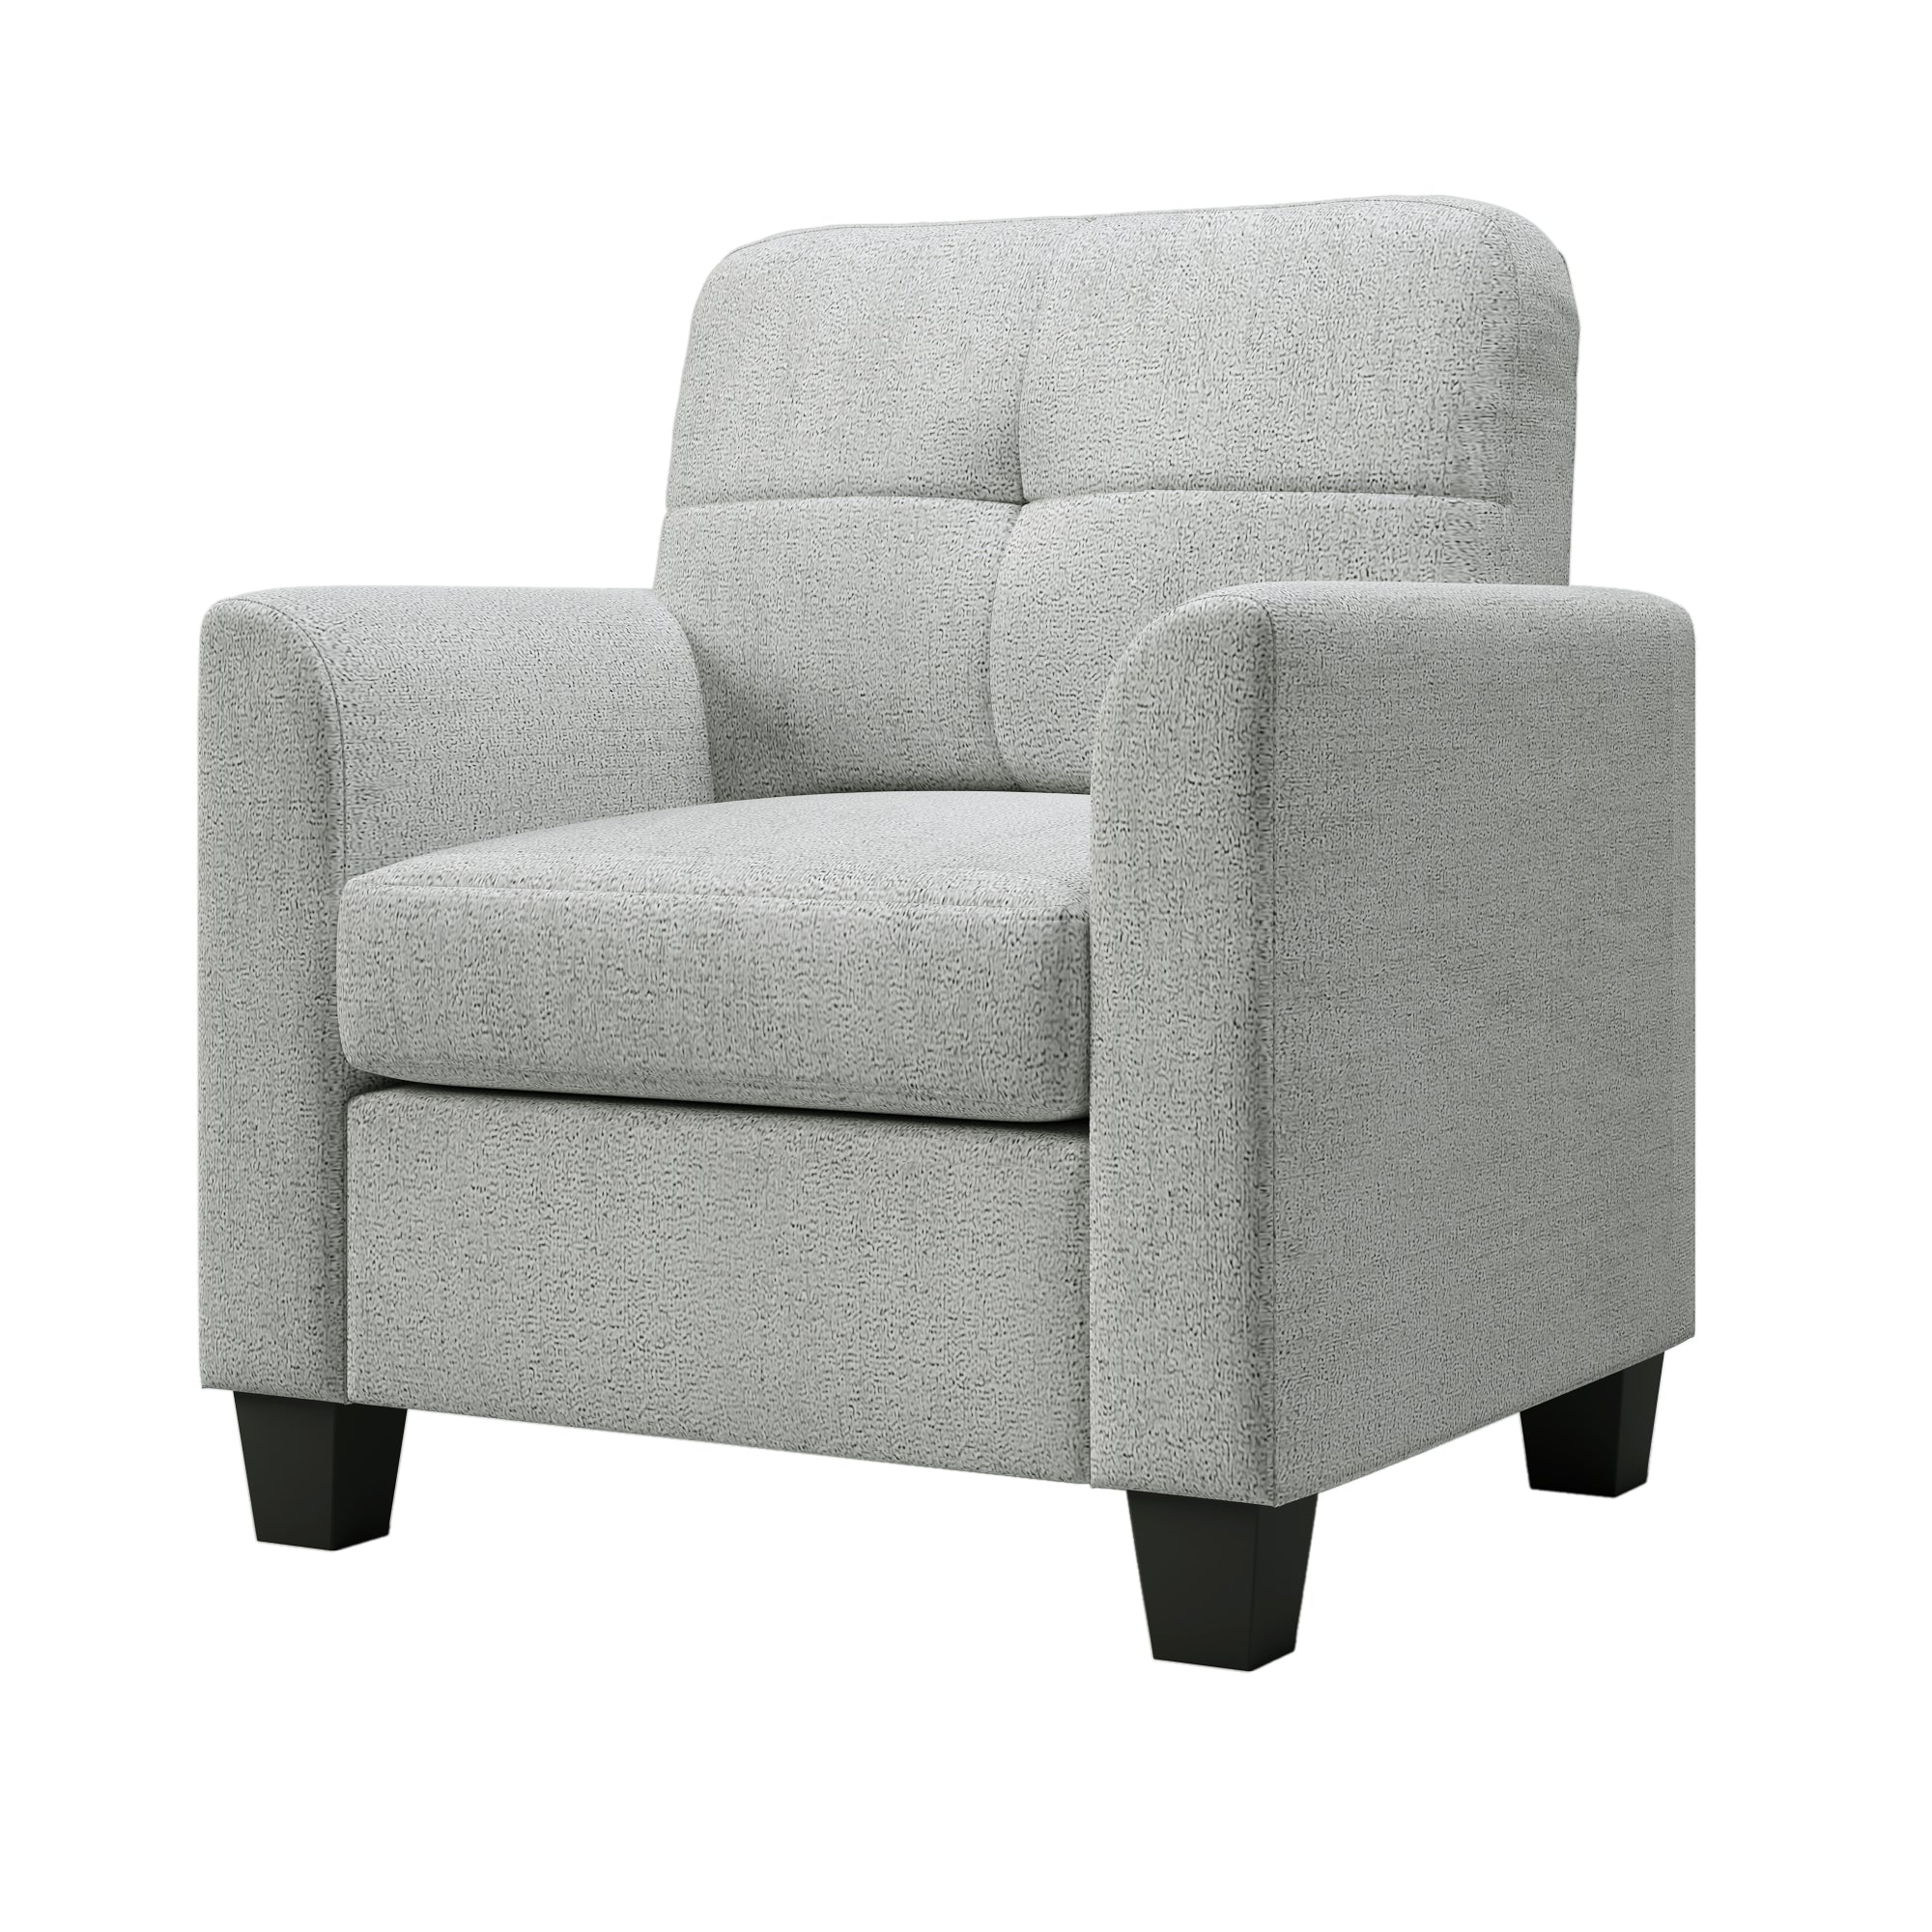 Mid Century Modern Accent Chair Cozy Armchair Button gray-primary living space-polyester